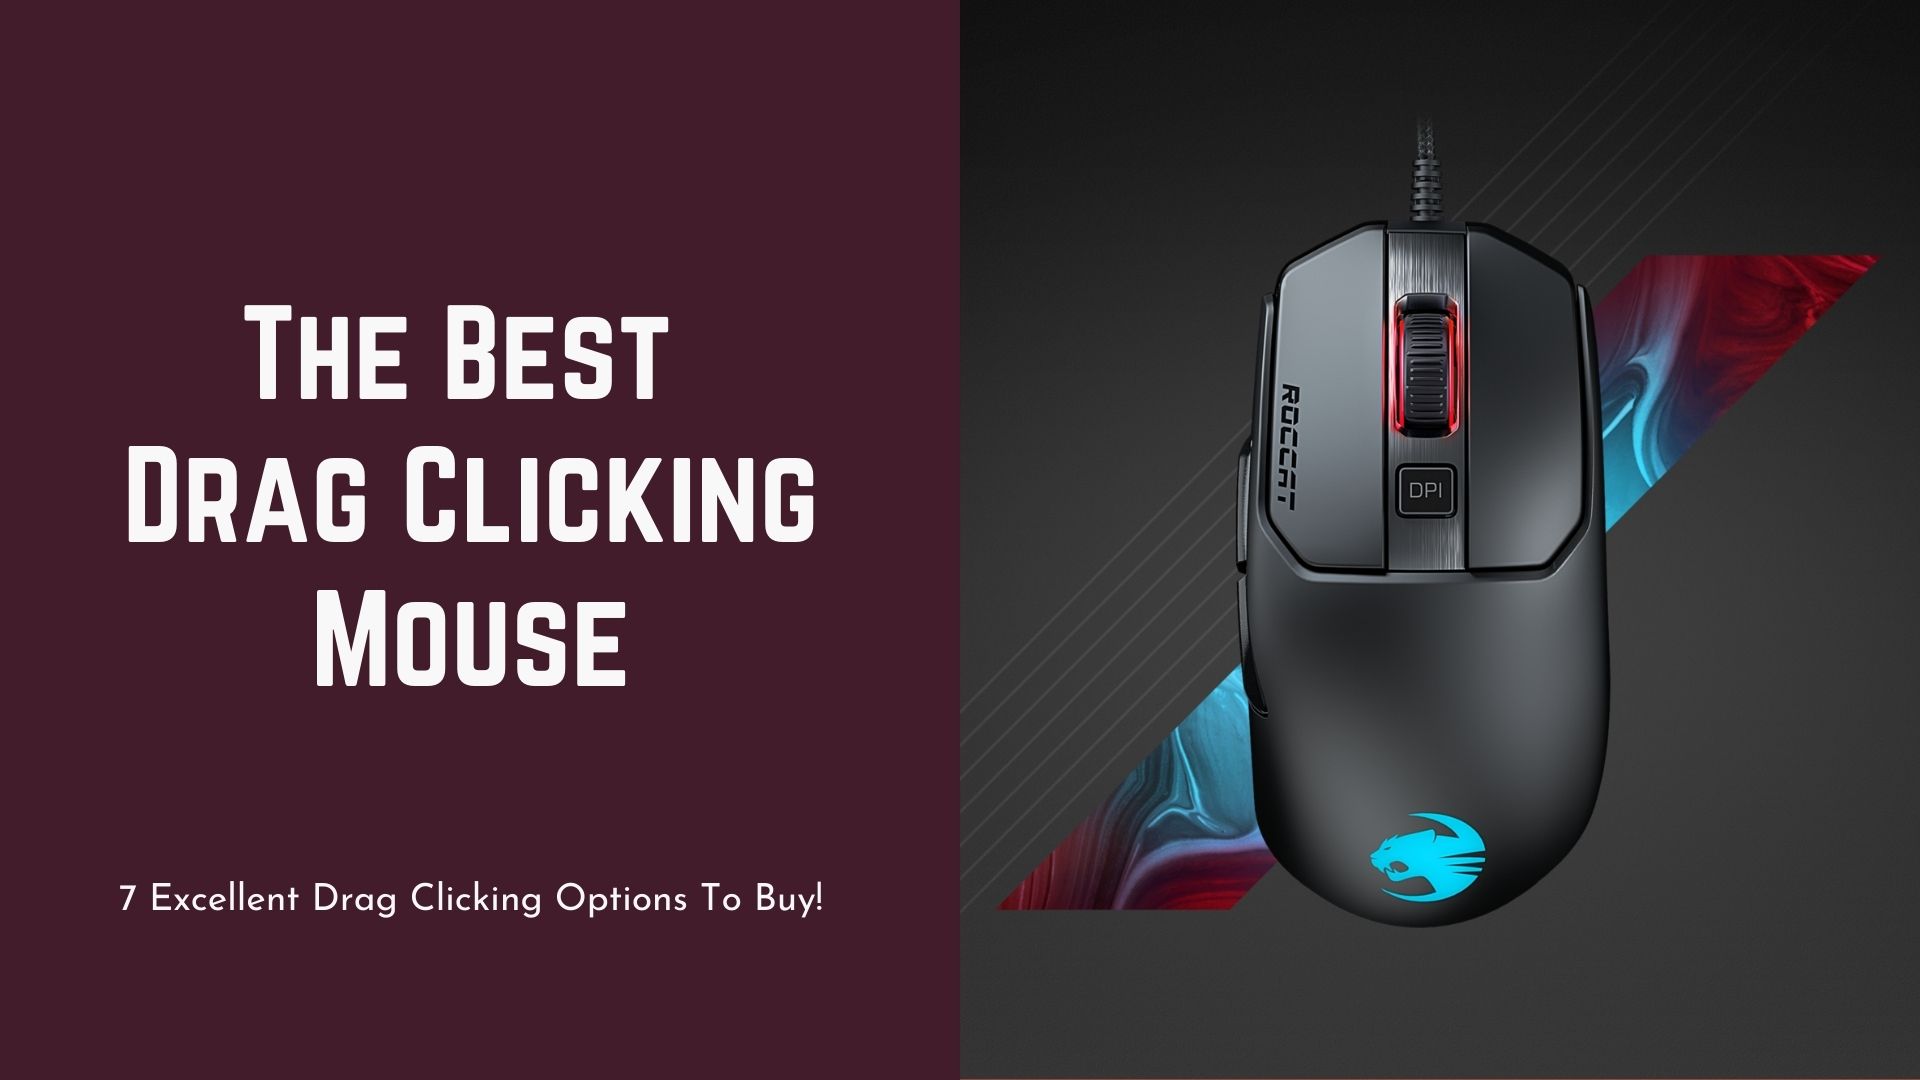 reign simply Statistical The Best Mouse For Drag Clicking In 2022 - eXputer.com